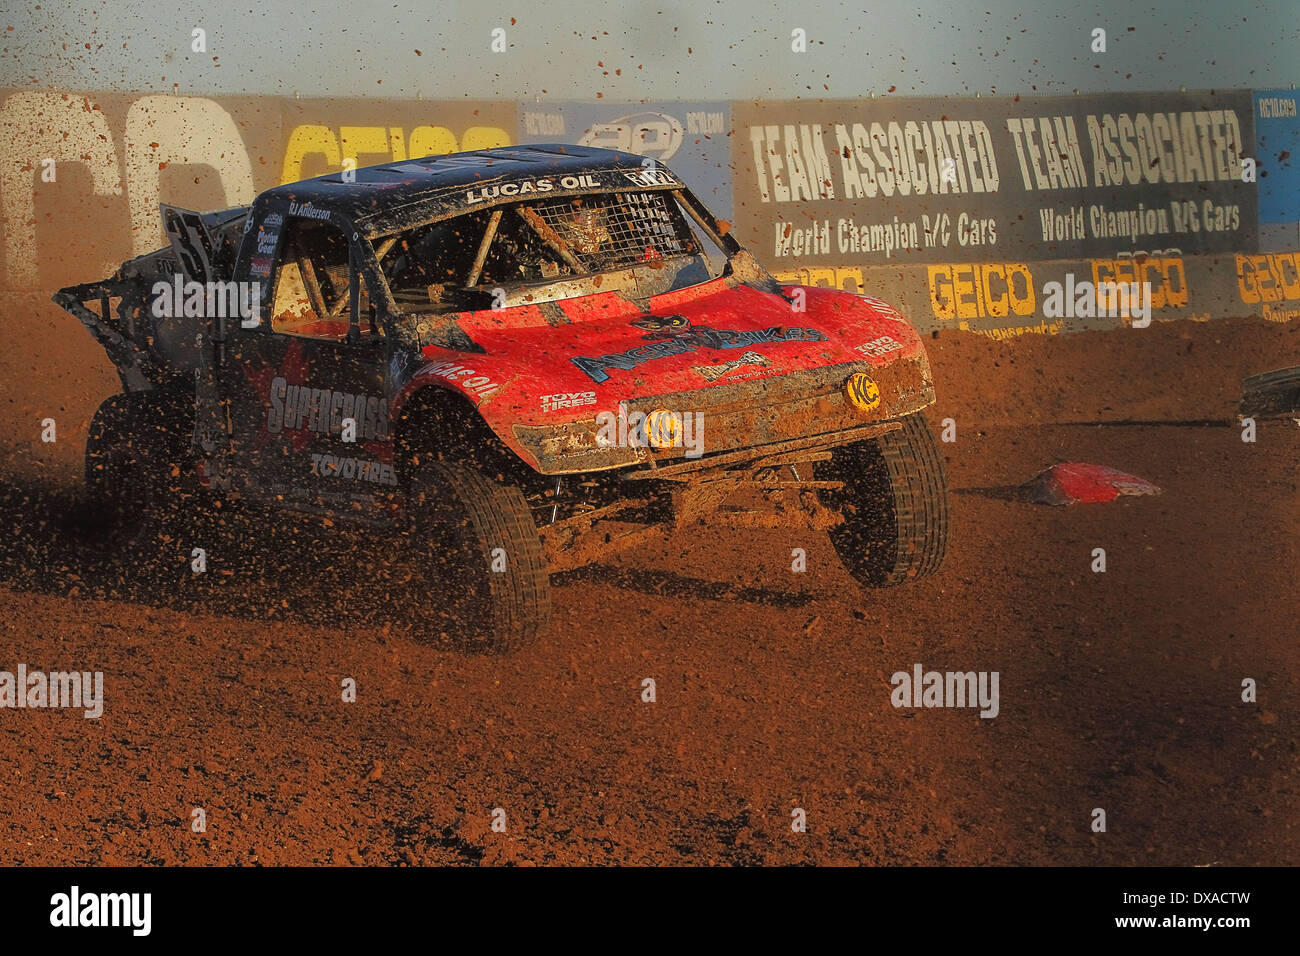 CHANDLER, AZ - OCT 28: RJ Anderson (37) at speed during the Lucas Oil Off Road Series racing Challenge Cup on October 28, 2012. Stock Photo